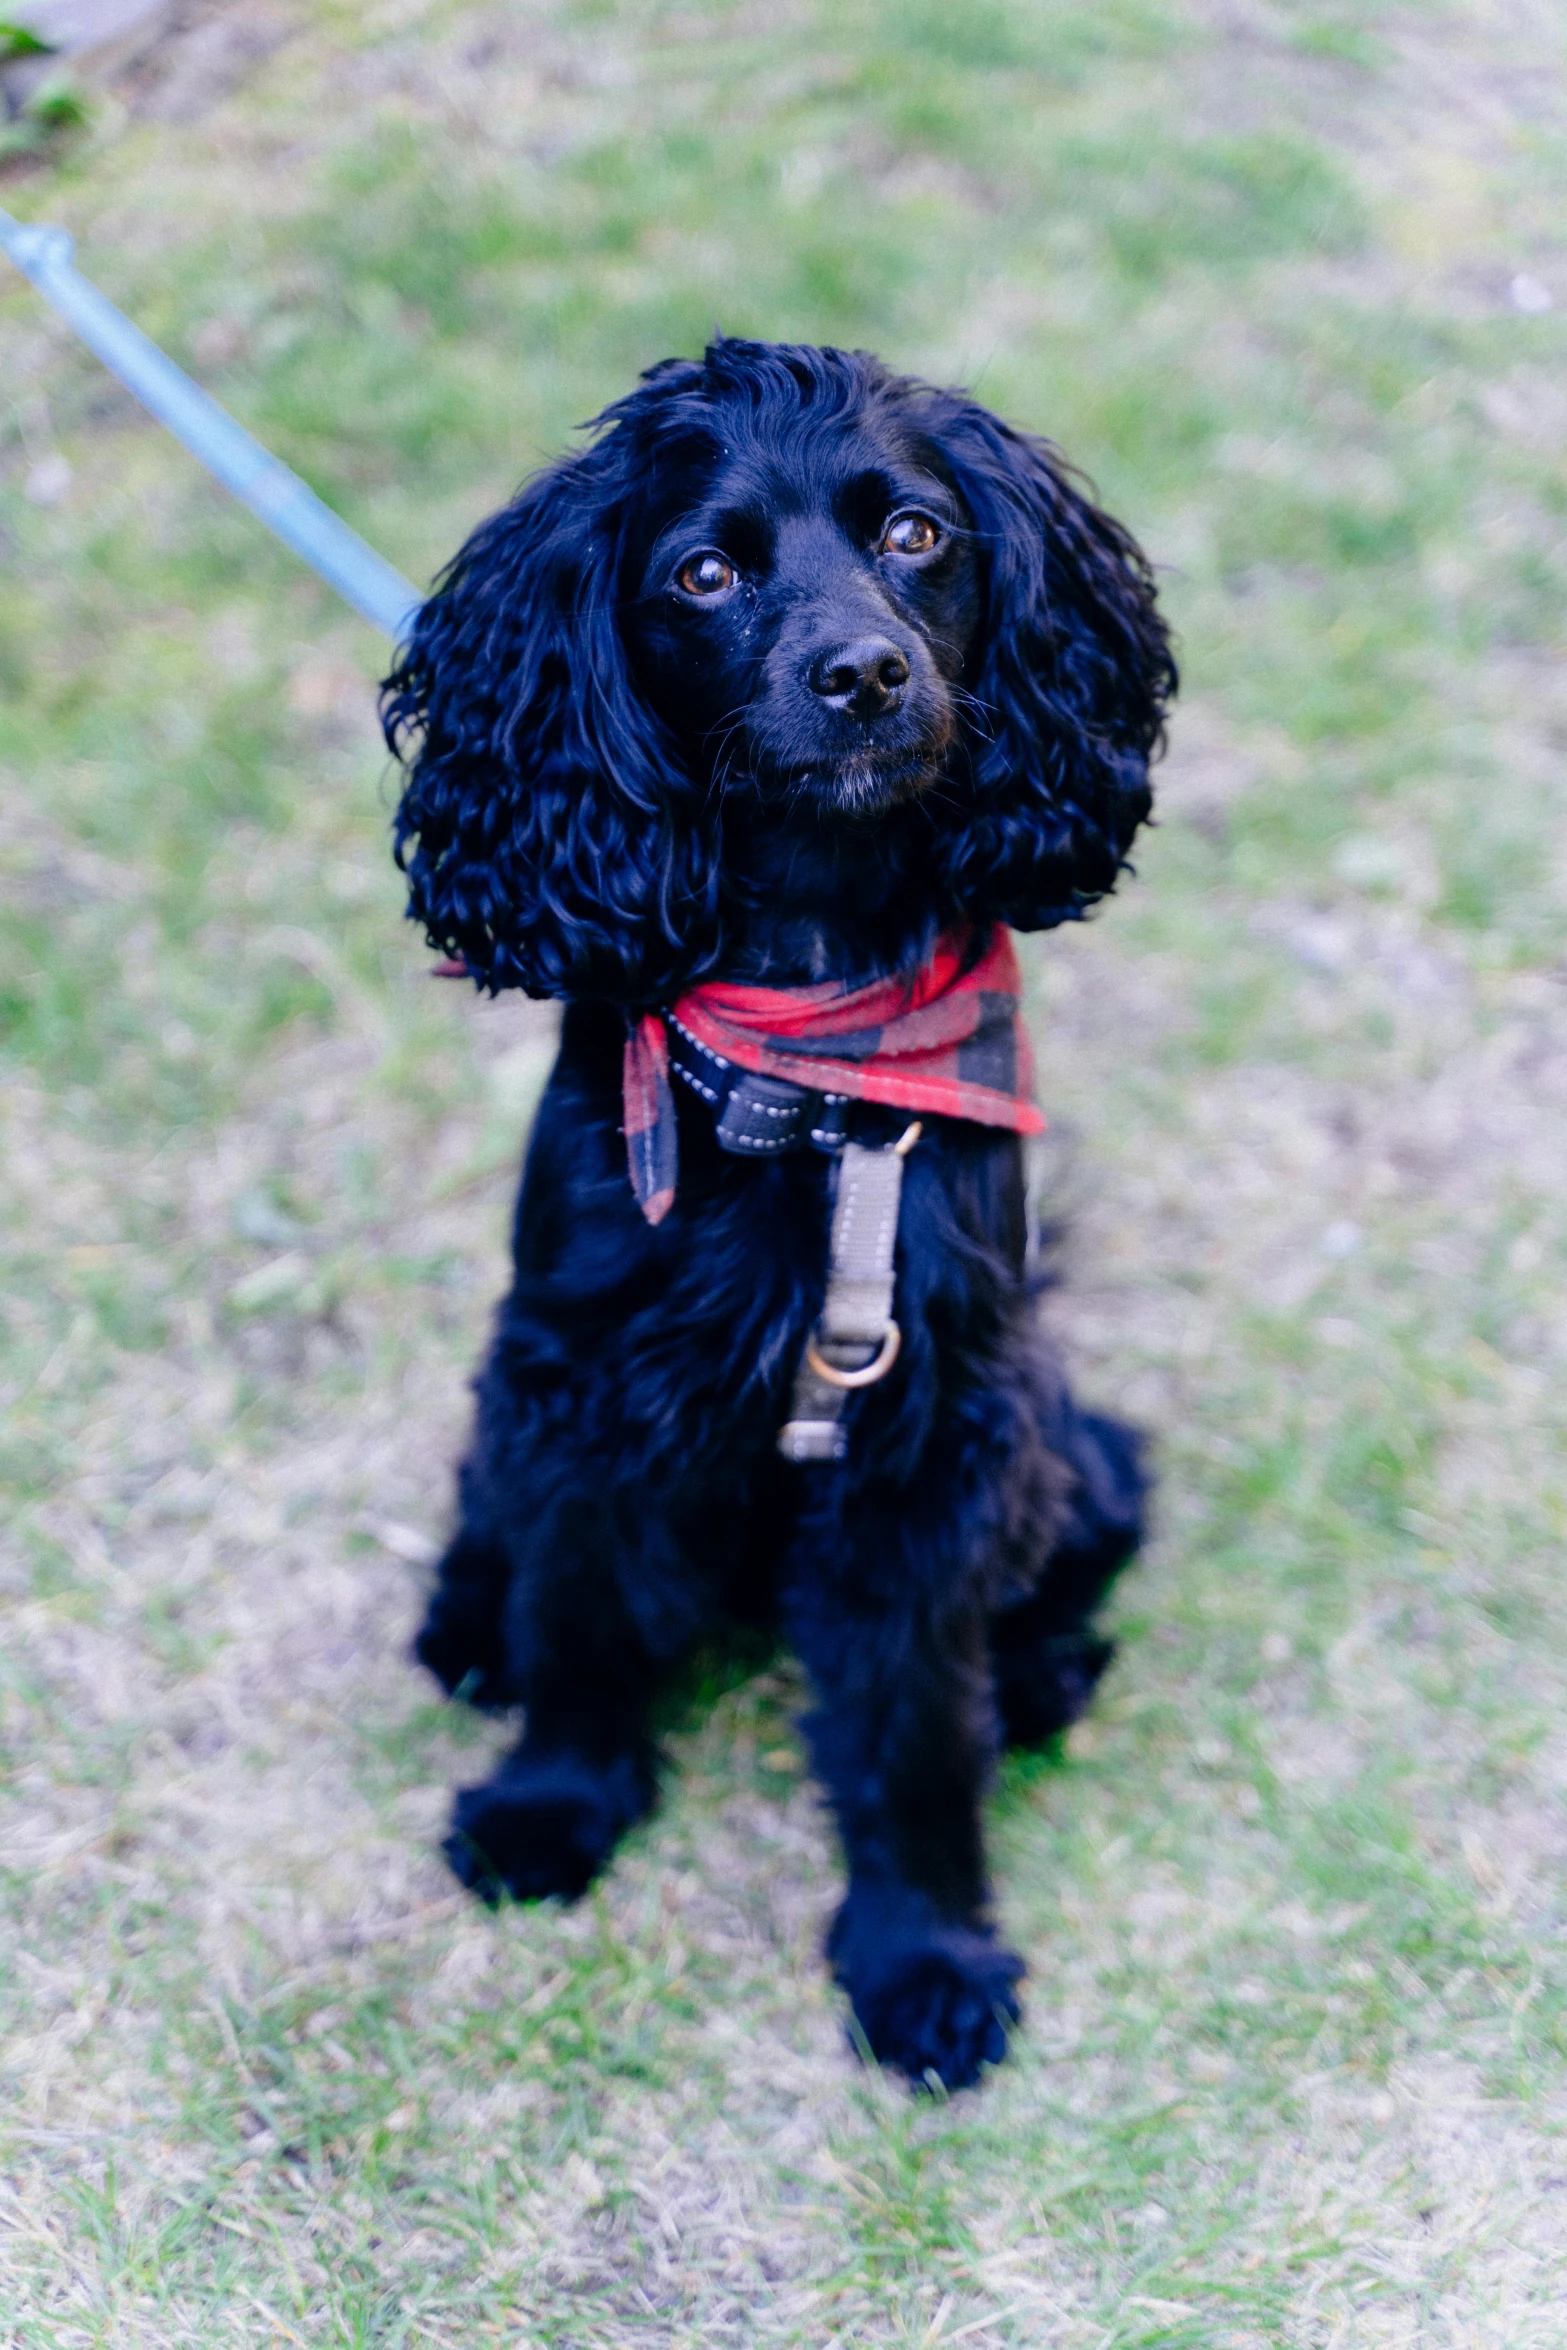 a dog with a red harness looking upward